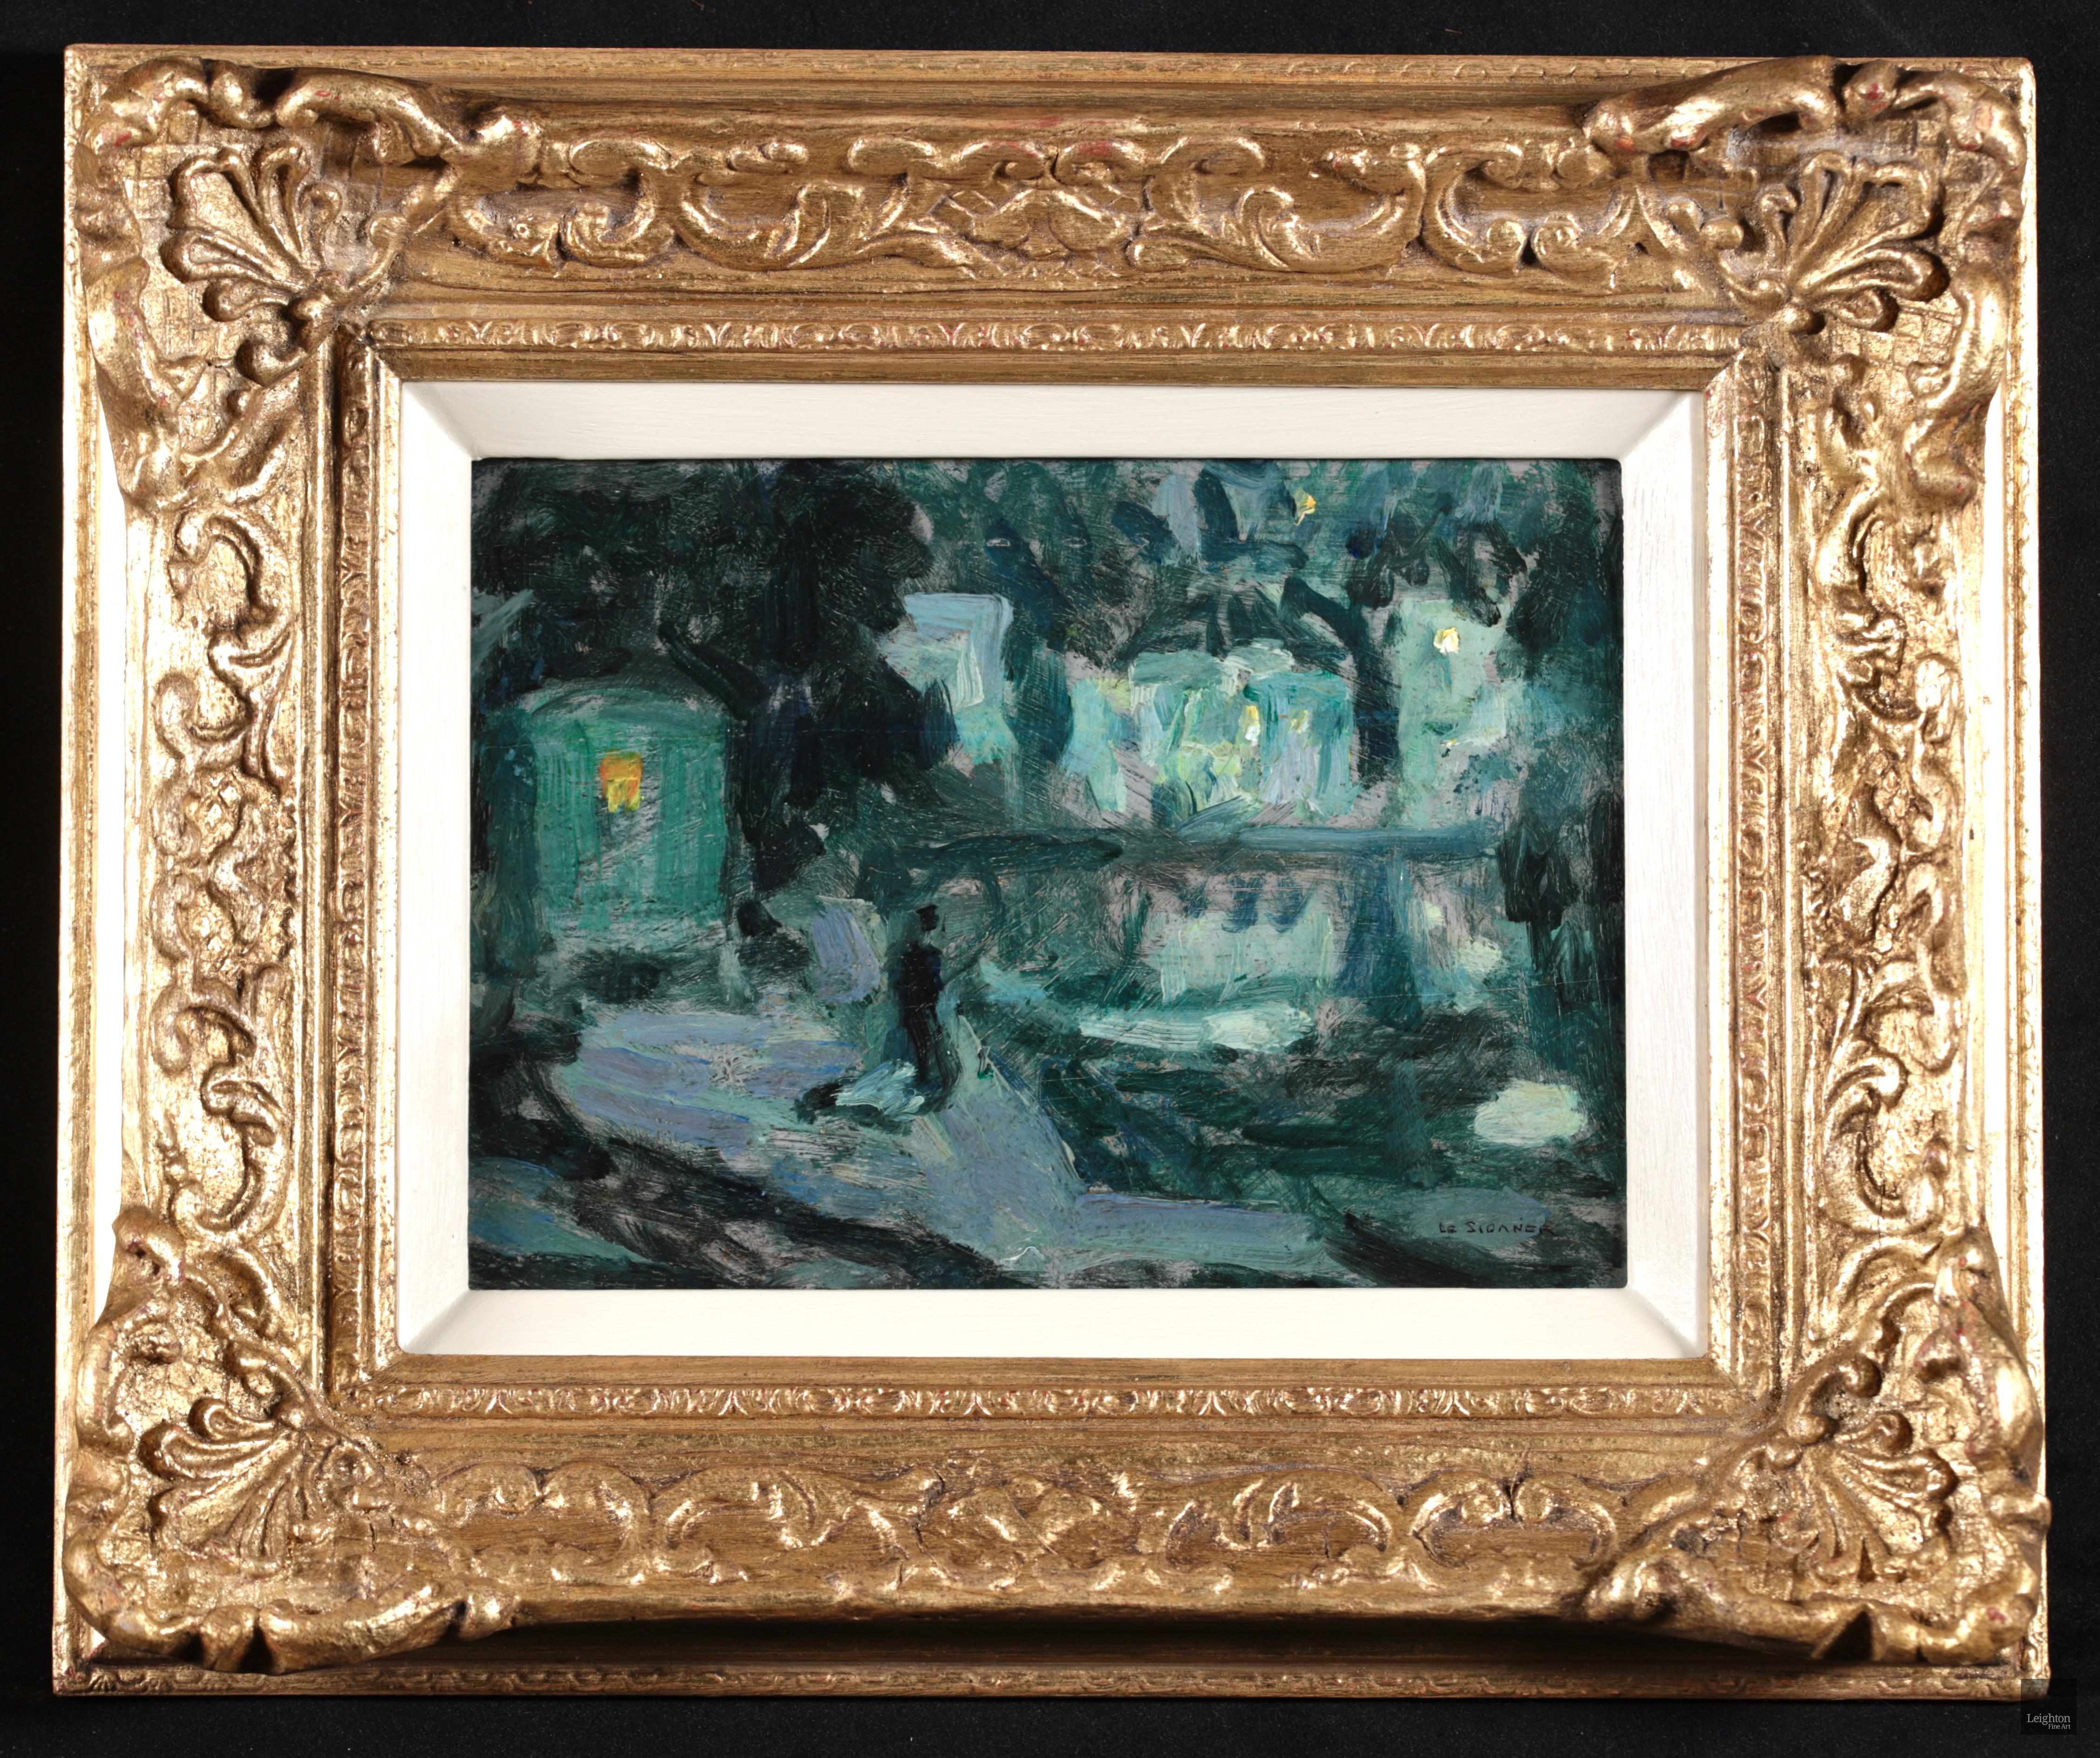 Signed post impressionist landscape oil on panel circa 1920 by French painter Henri le Sidaner. The work, painted in green and blue tones, depicts a moonlit riverscape in Quimperle which is in Brittany, France. The town's buildings are reflecting in